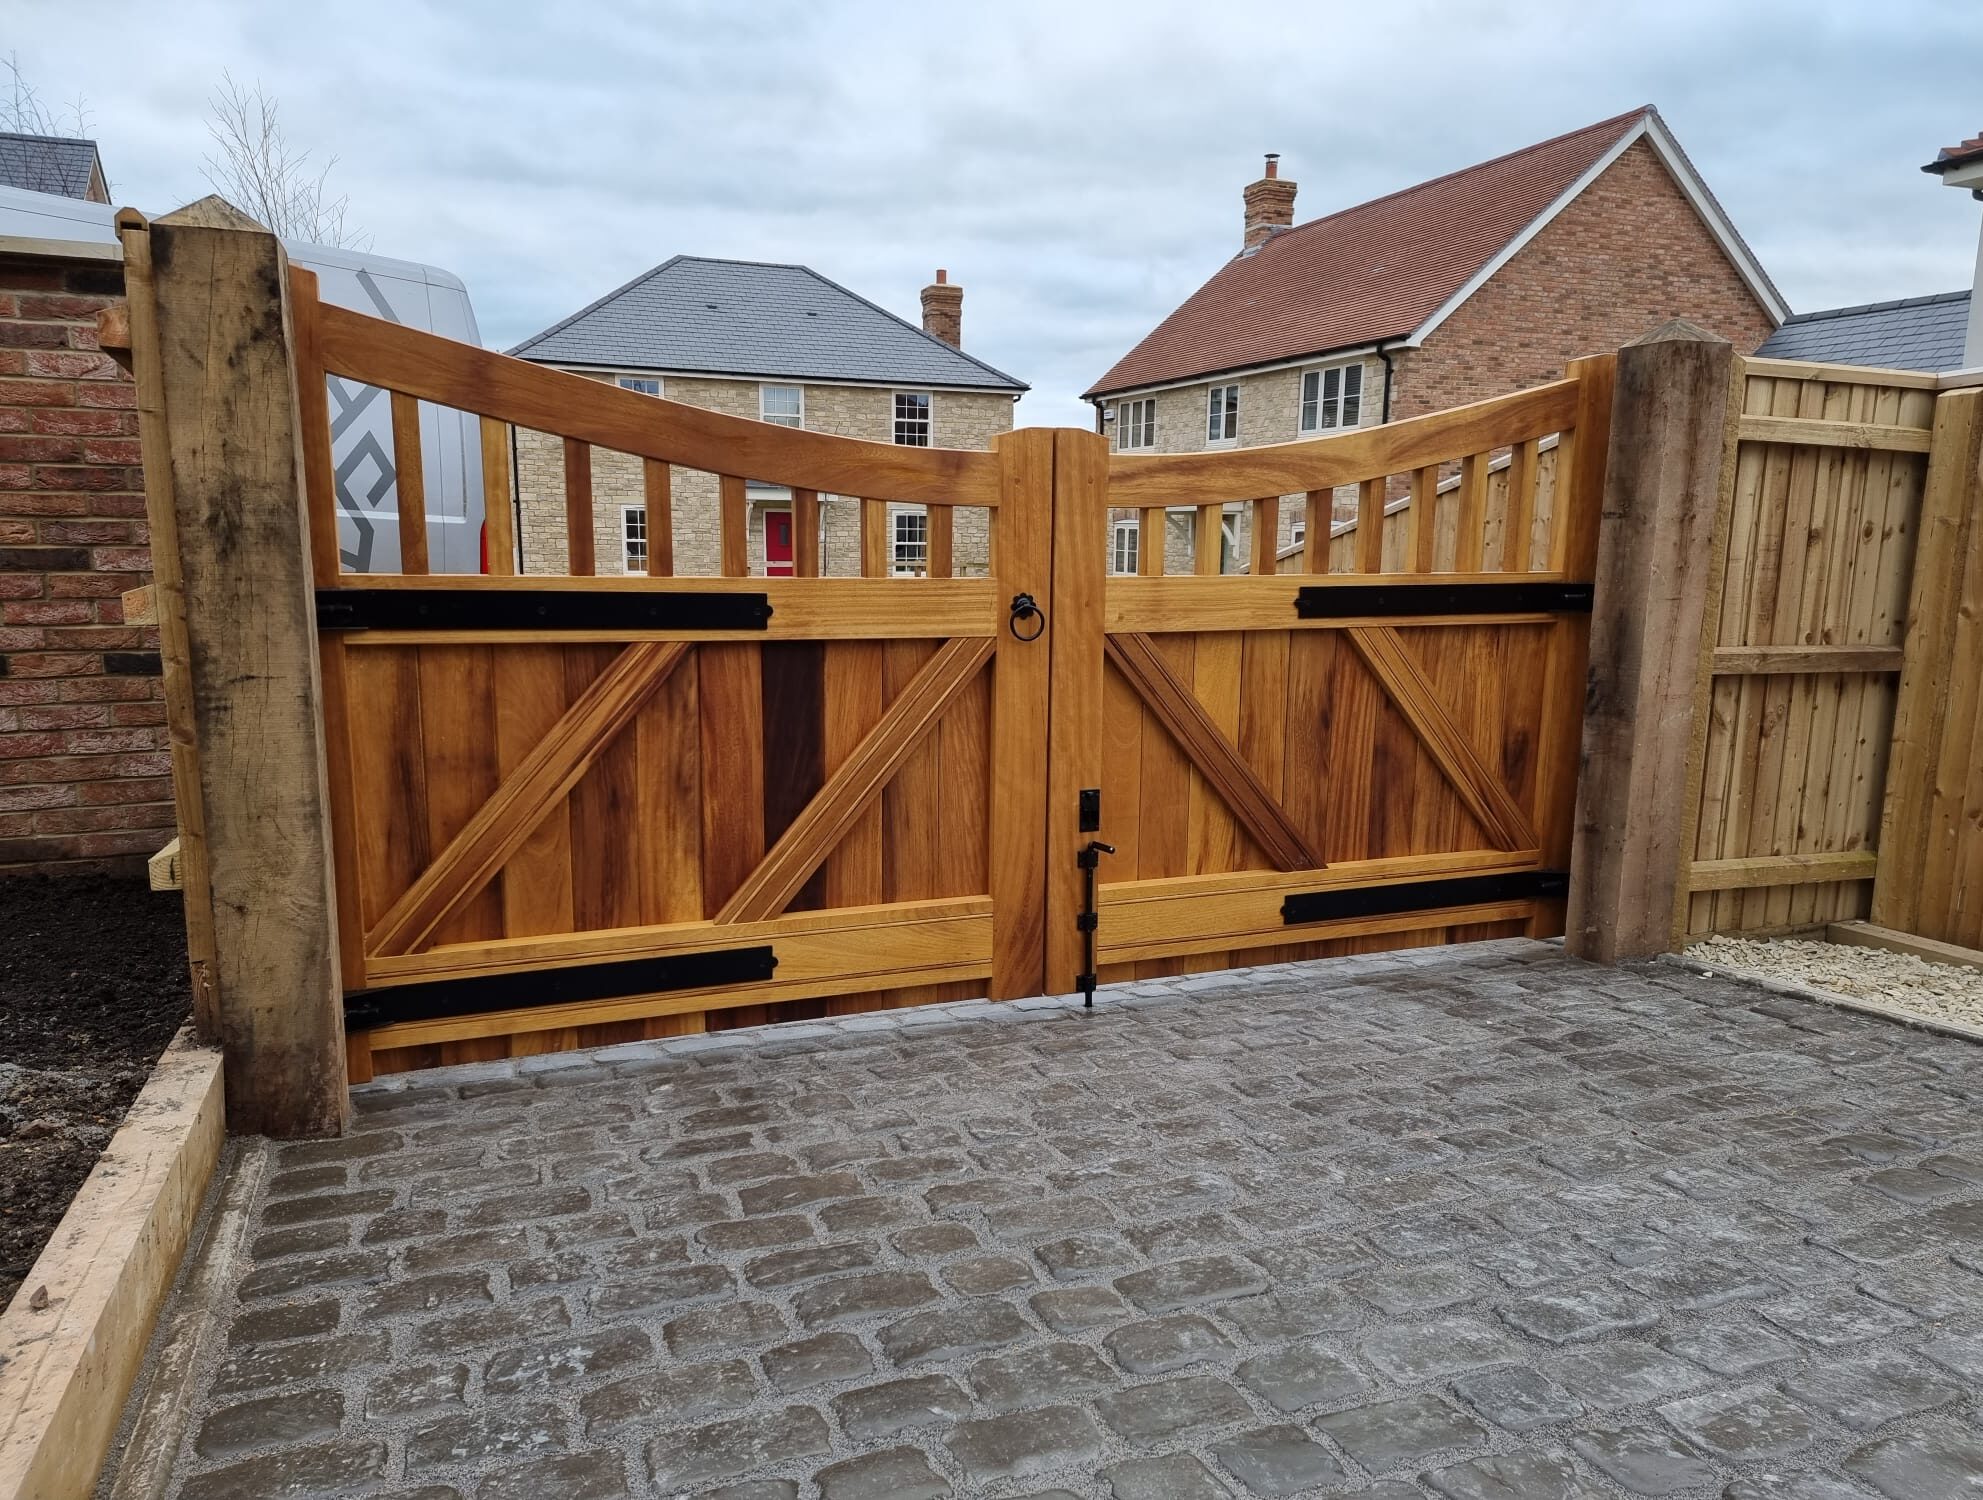 Bespoke timber entrance gate by Kings Stag Joinery